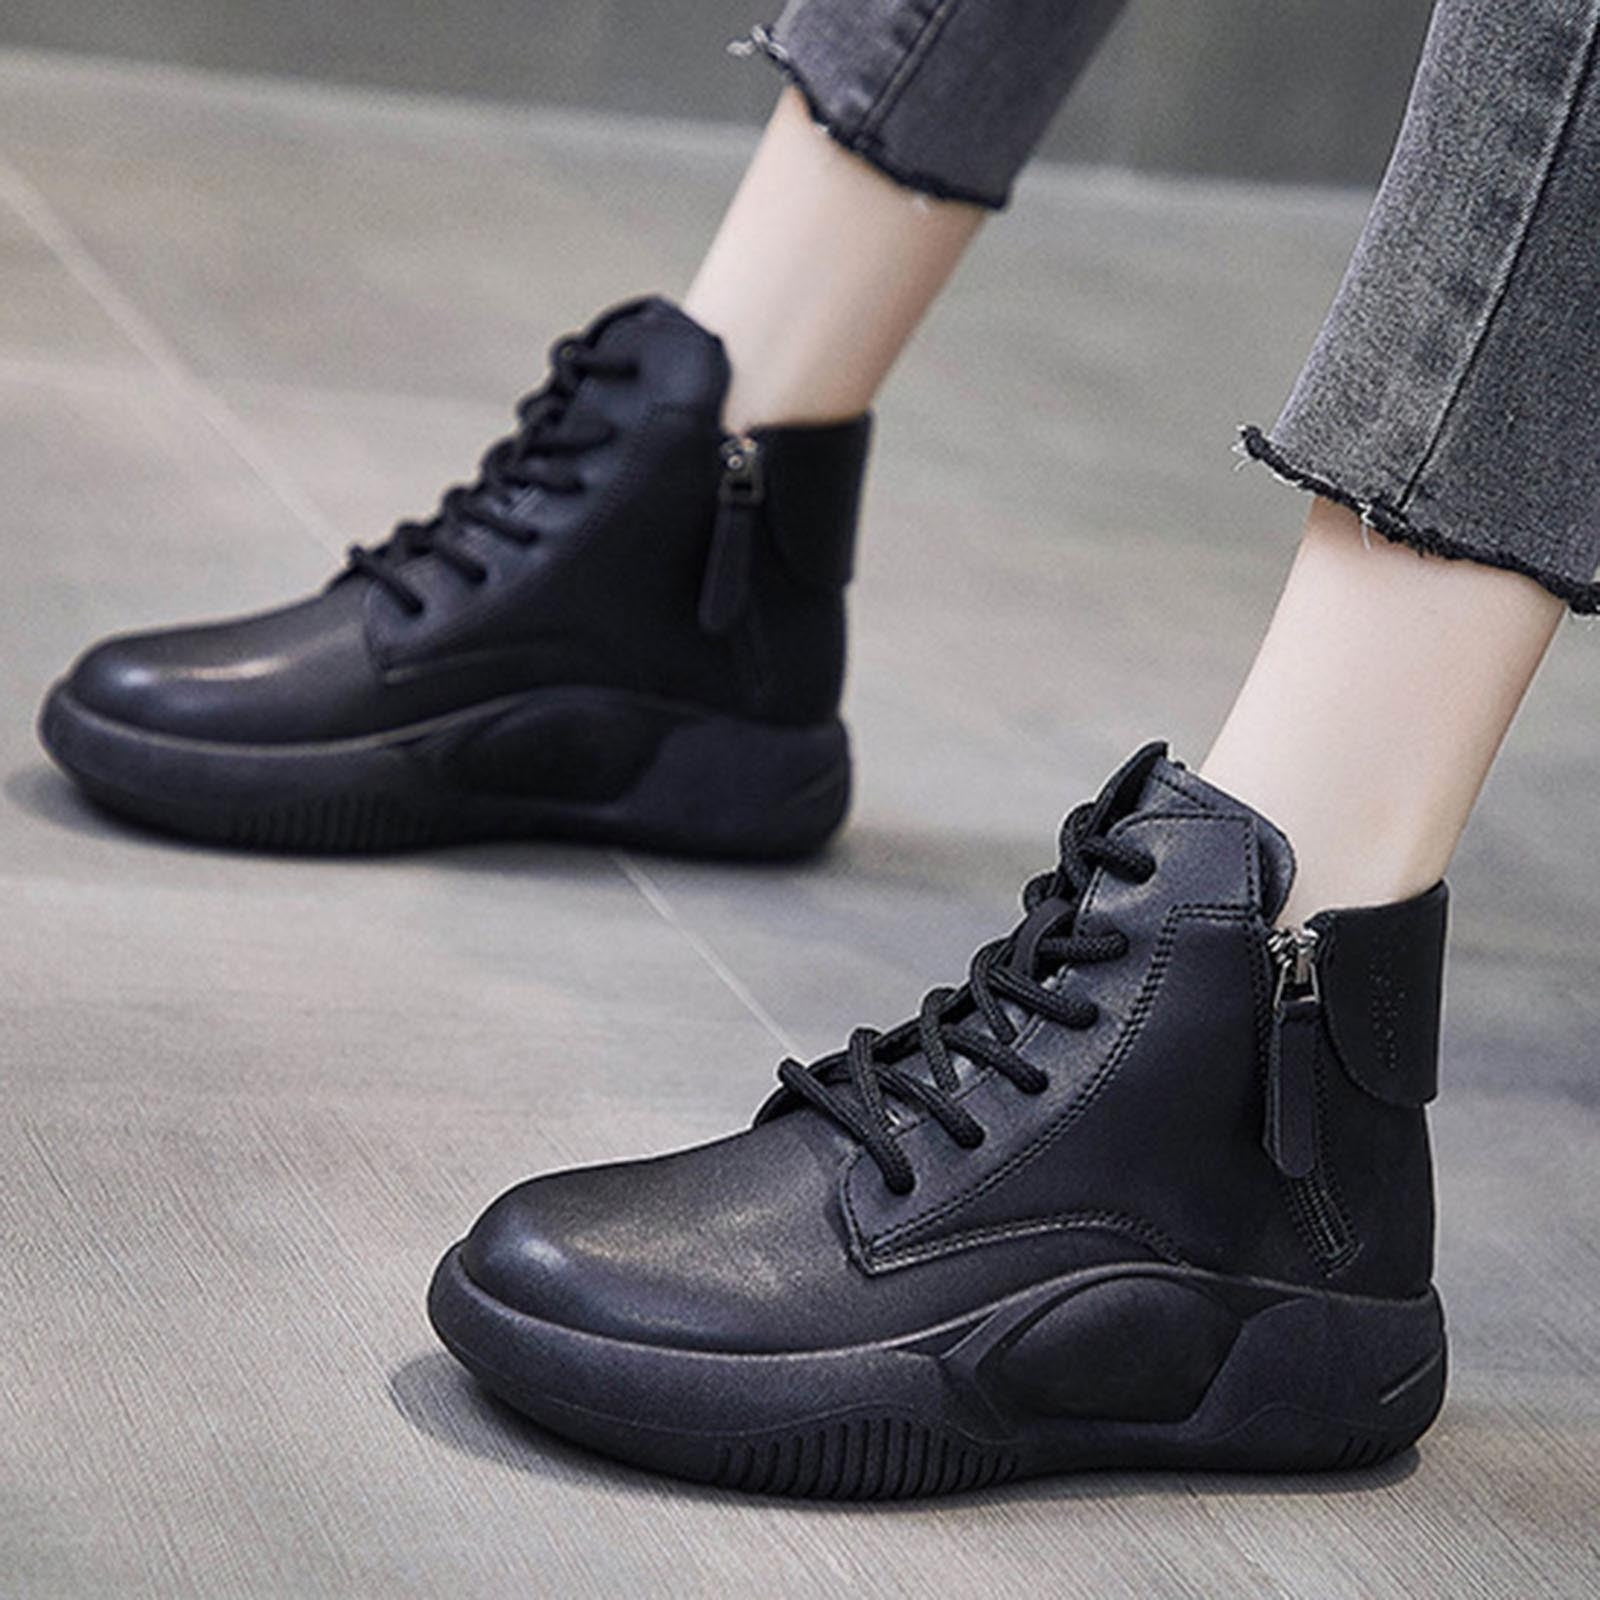 Boots | High Heel Girls Shoes High Ankle Boots For Women Sneakers For Girls  And Special Occasions | Freeup